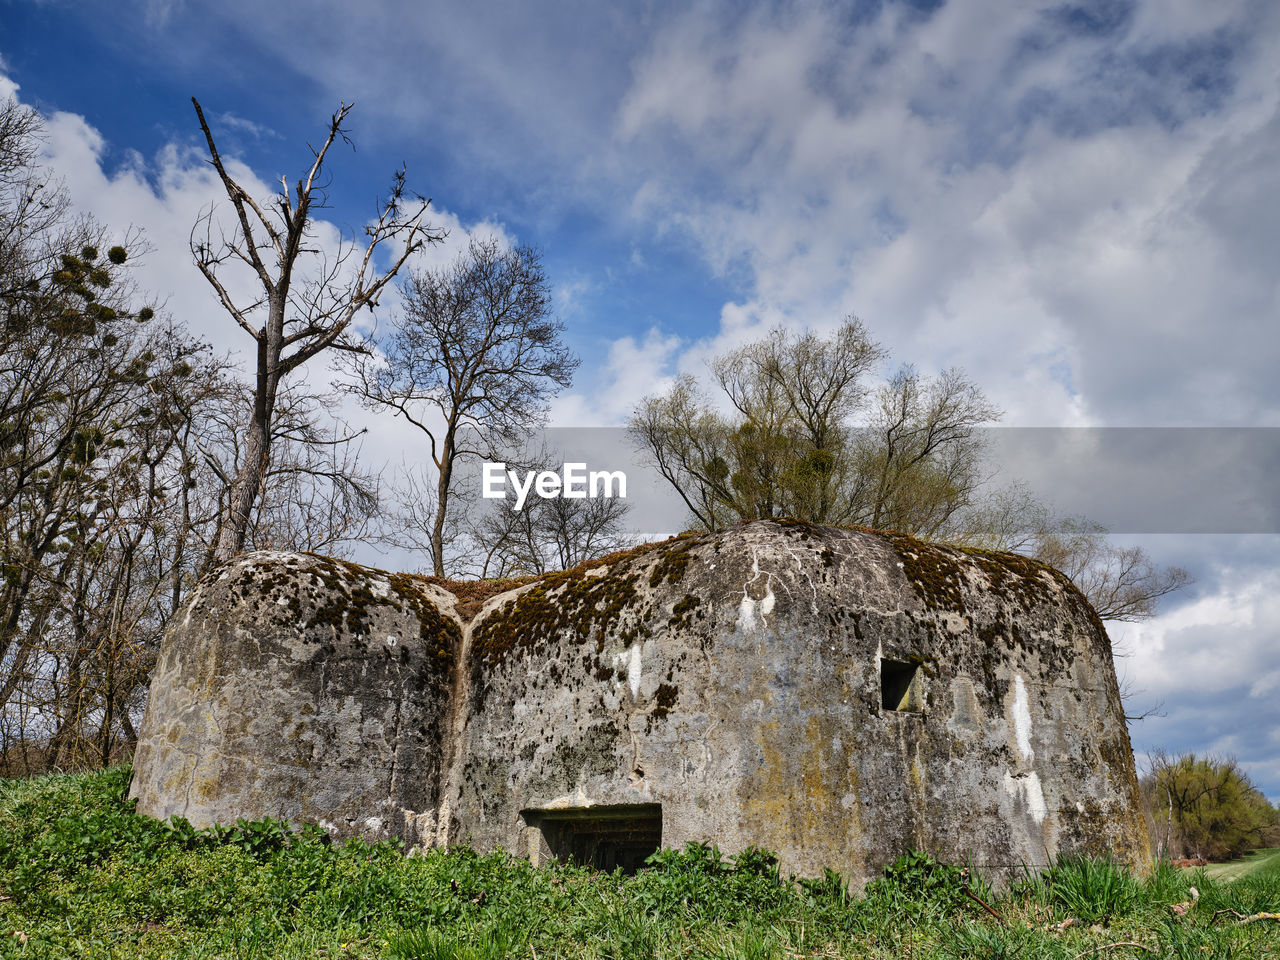 plant, ruins, sky, cloud, rural area, tree, architecture, nature, built structure, grass, history, building, no people, land, landscape, the past, rock, field, outdoors, building exterior, old, day, house, environment, stone material, old ruin, ancient, rural scene, travel destinations, ancient history, abandoned, scenics - nature